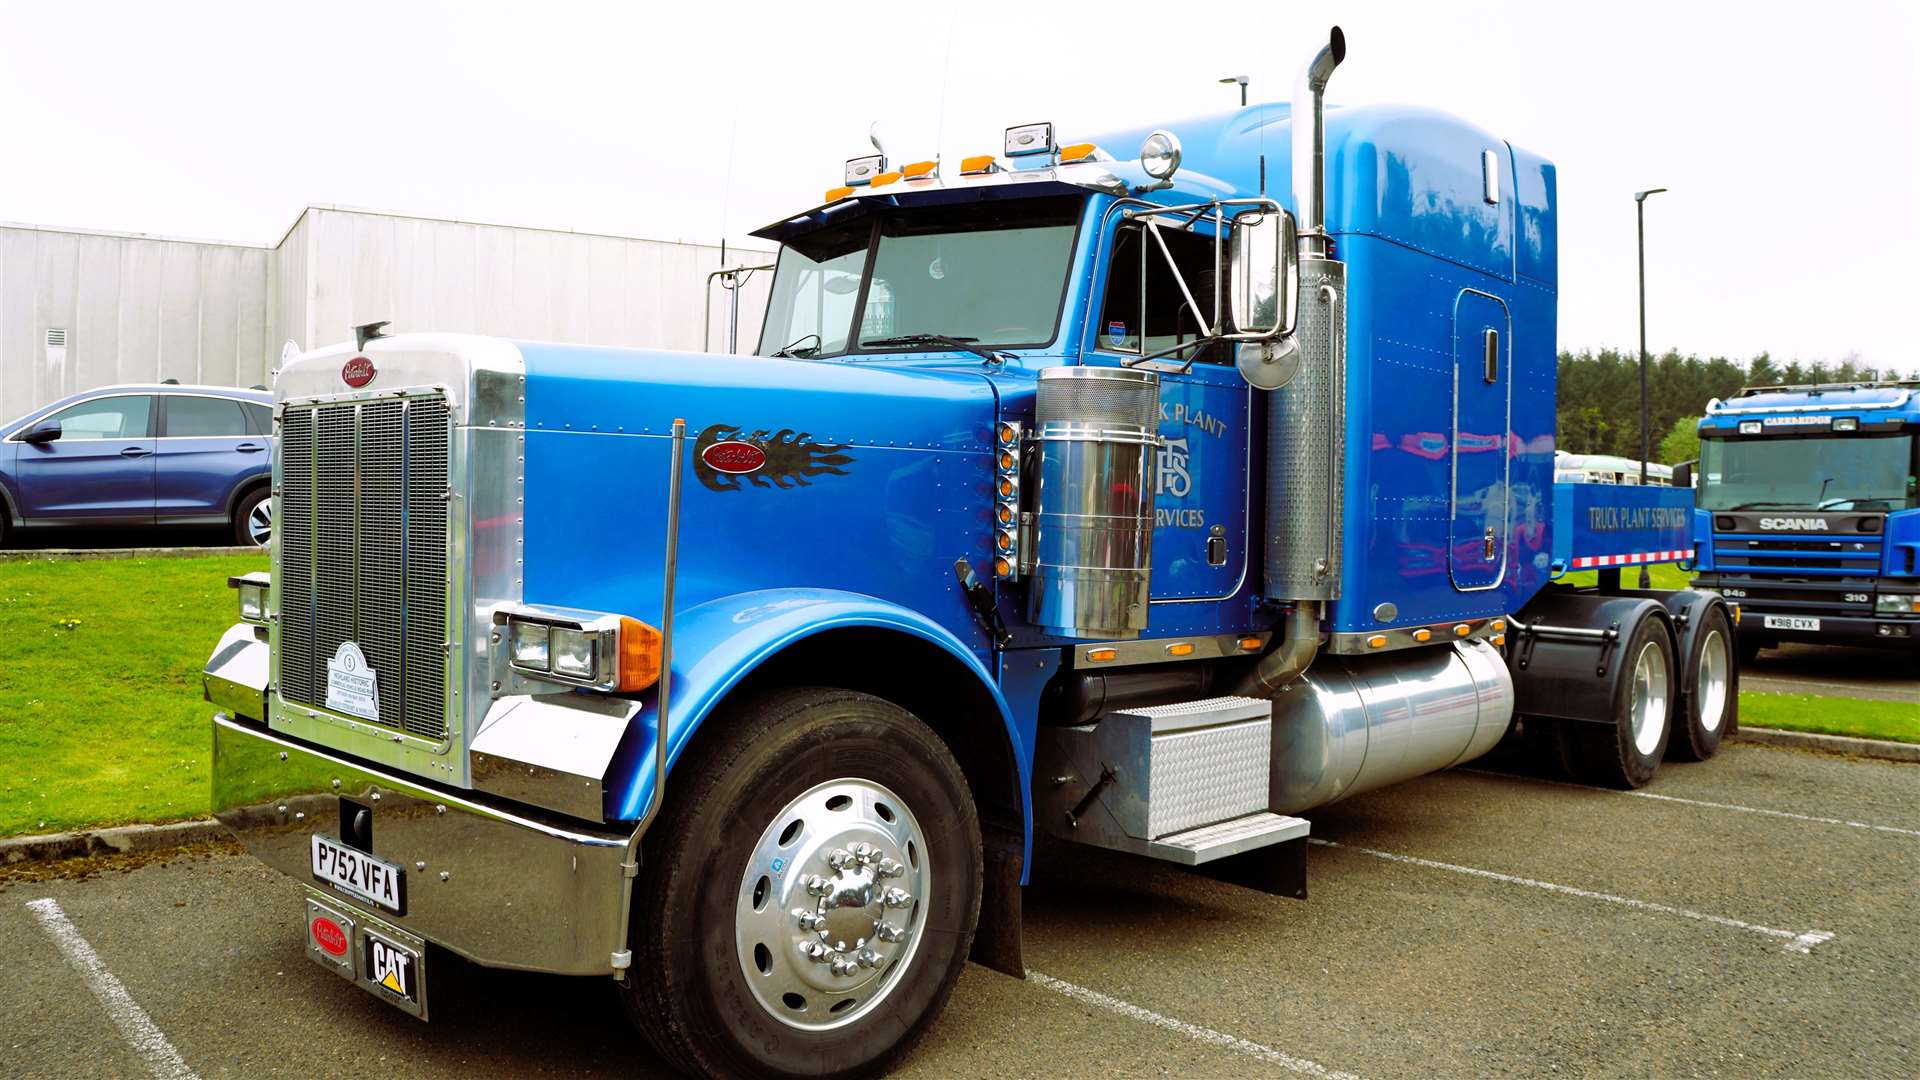 Peterbilt trucks are identified by a large red-oval brand emblem, in use since 1953. Picture: DGS